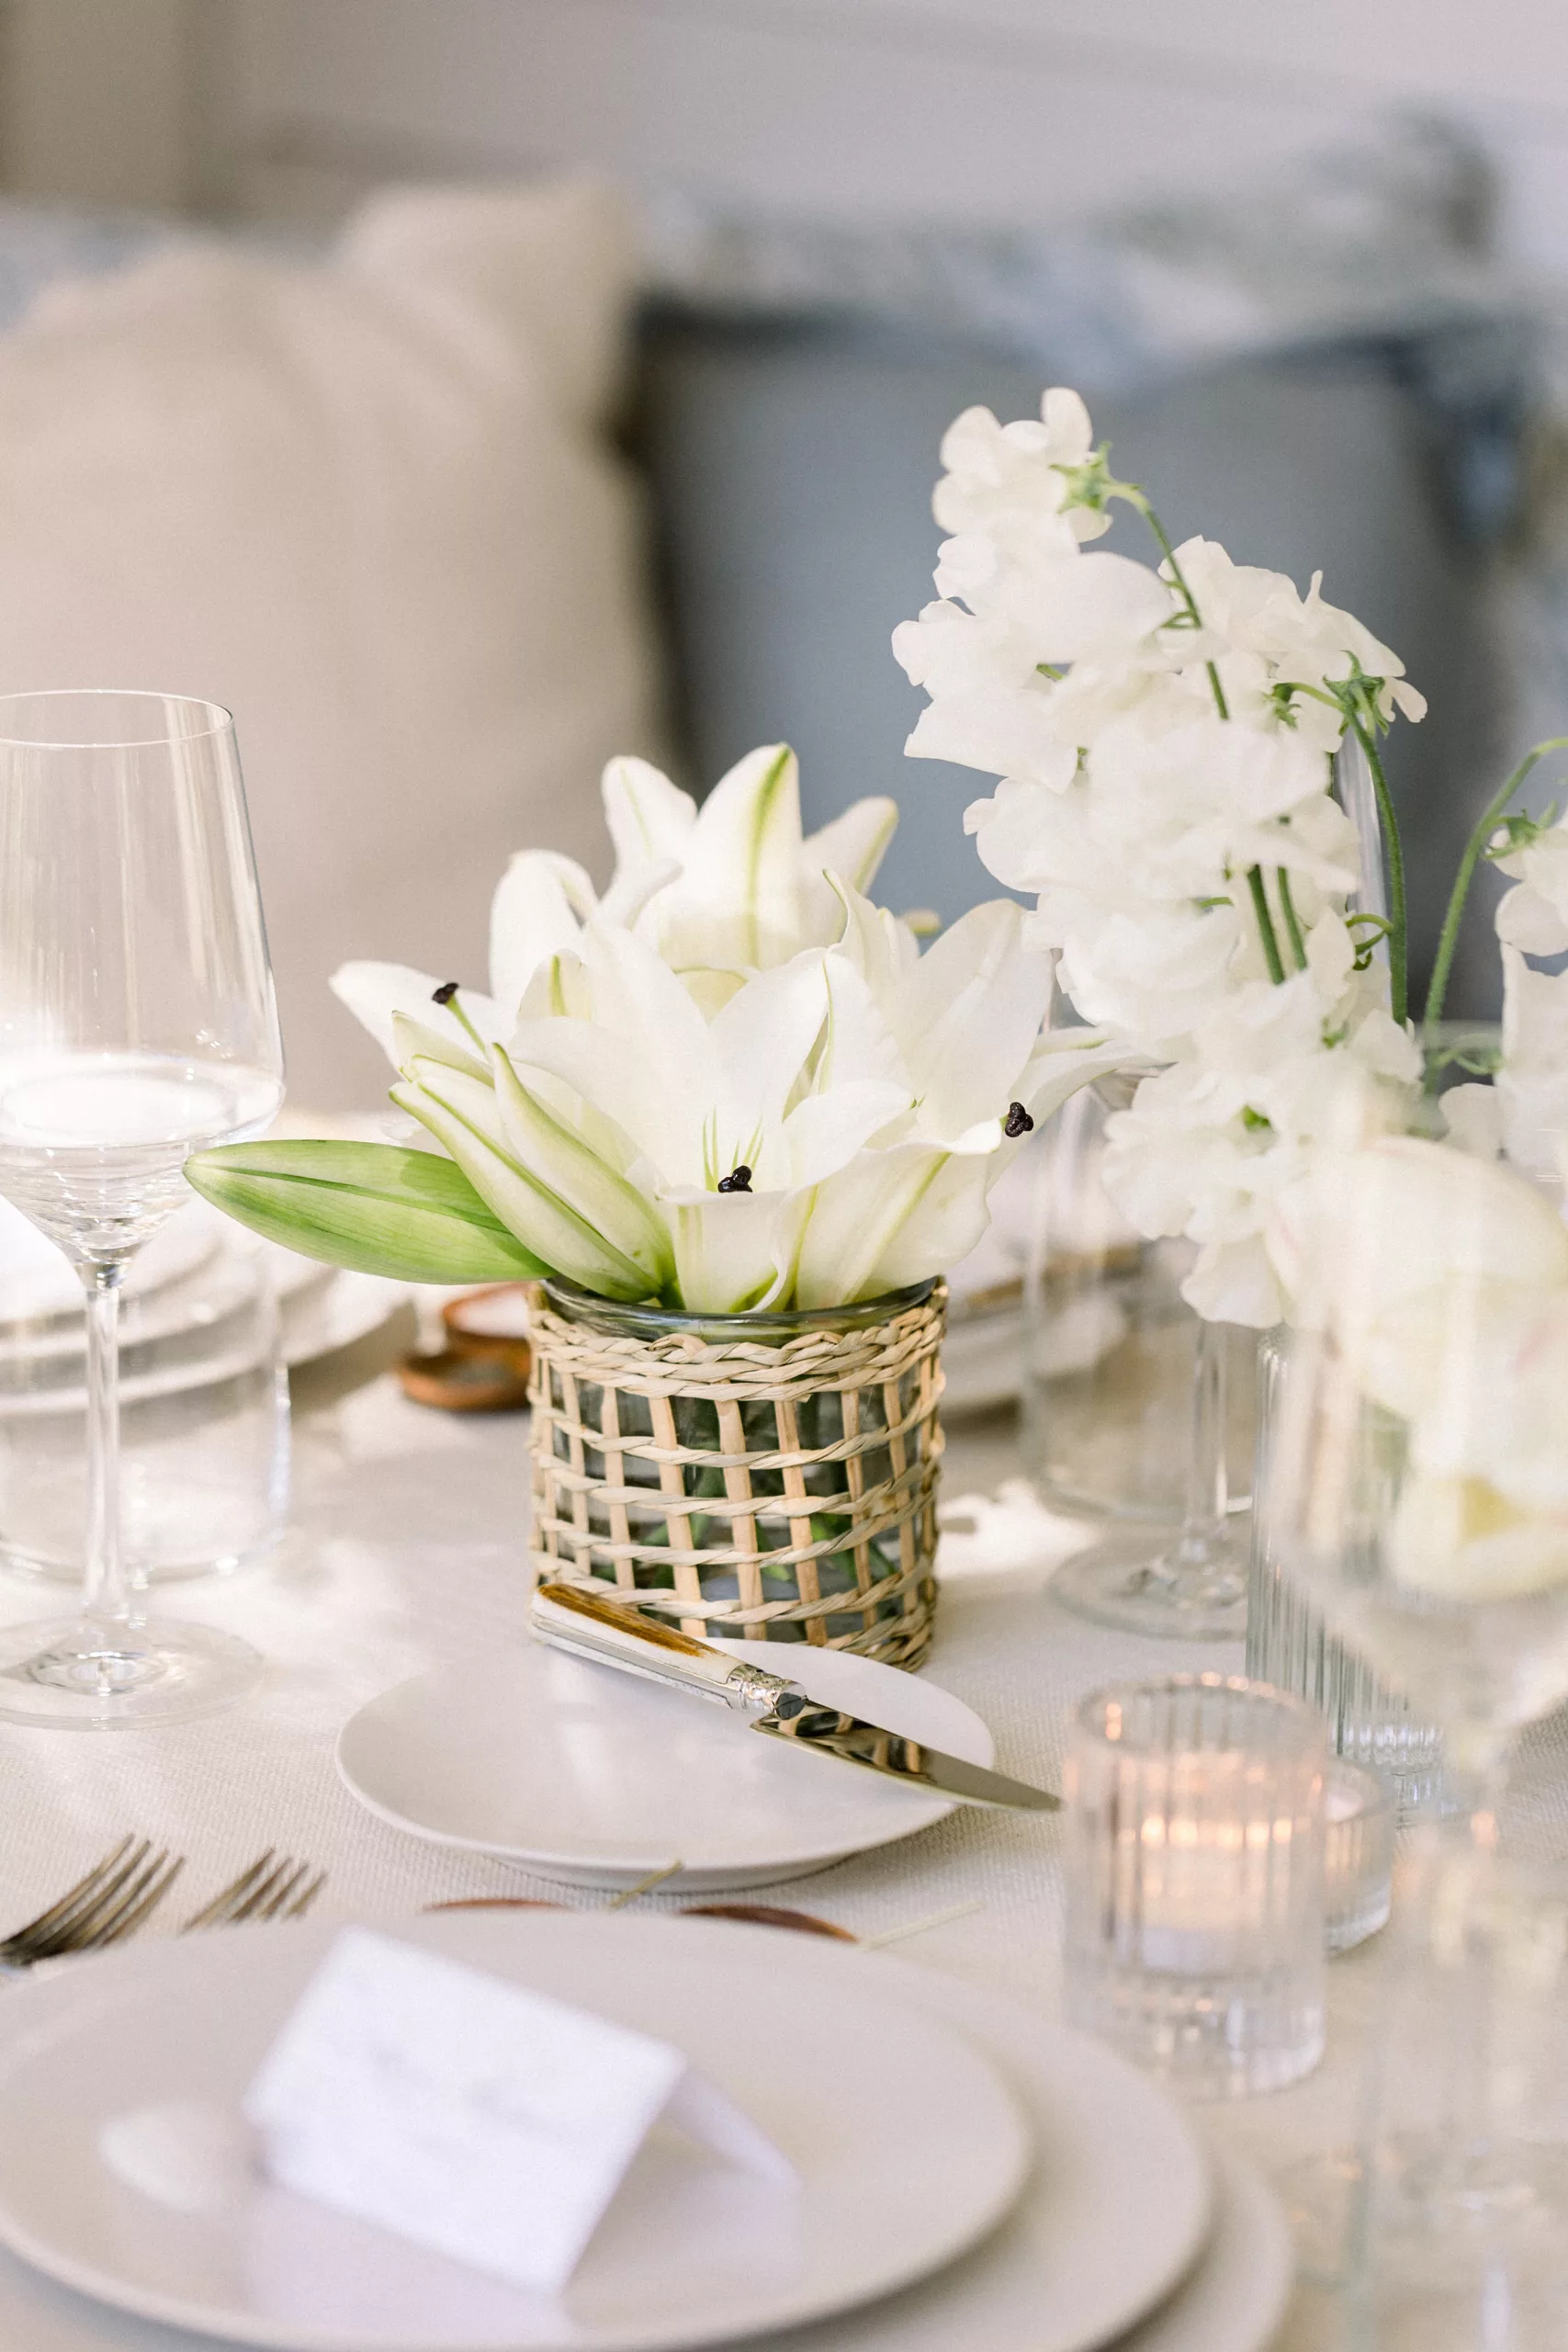 Details of a white themed table setting at a wedding reception